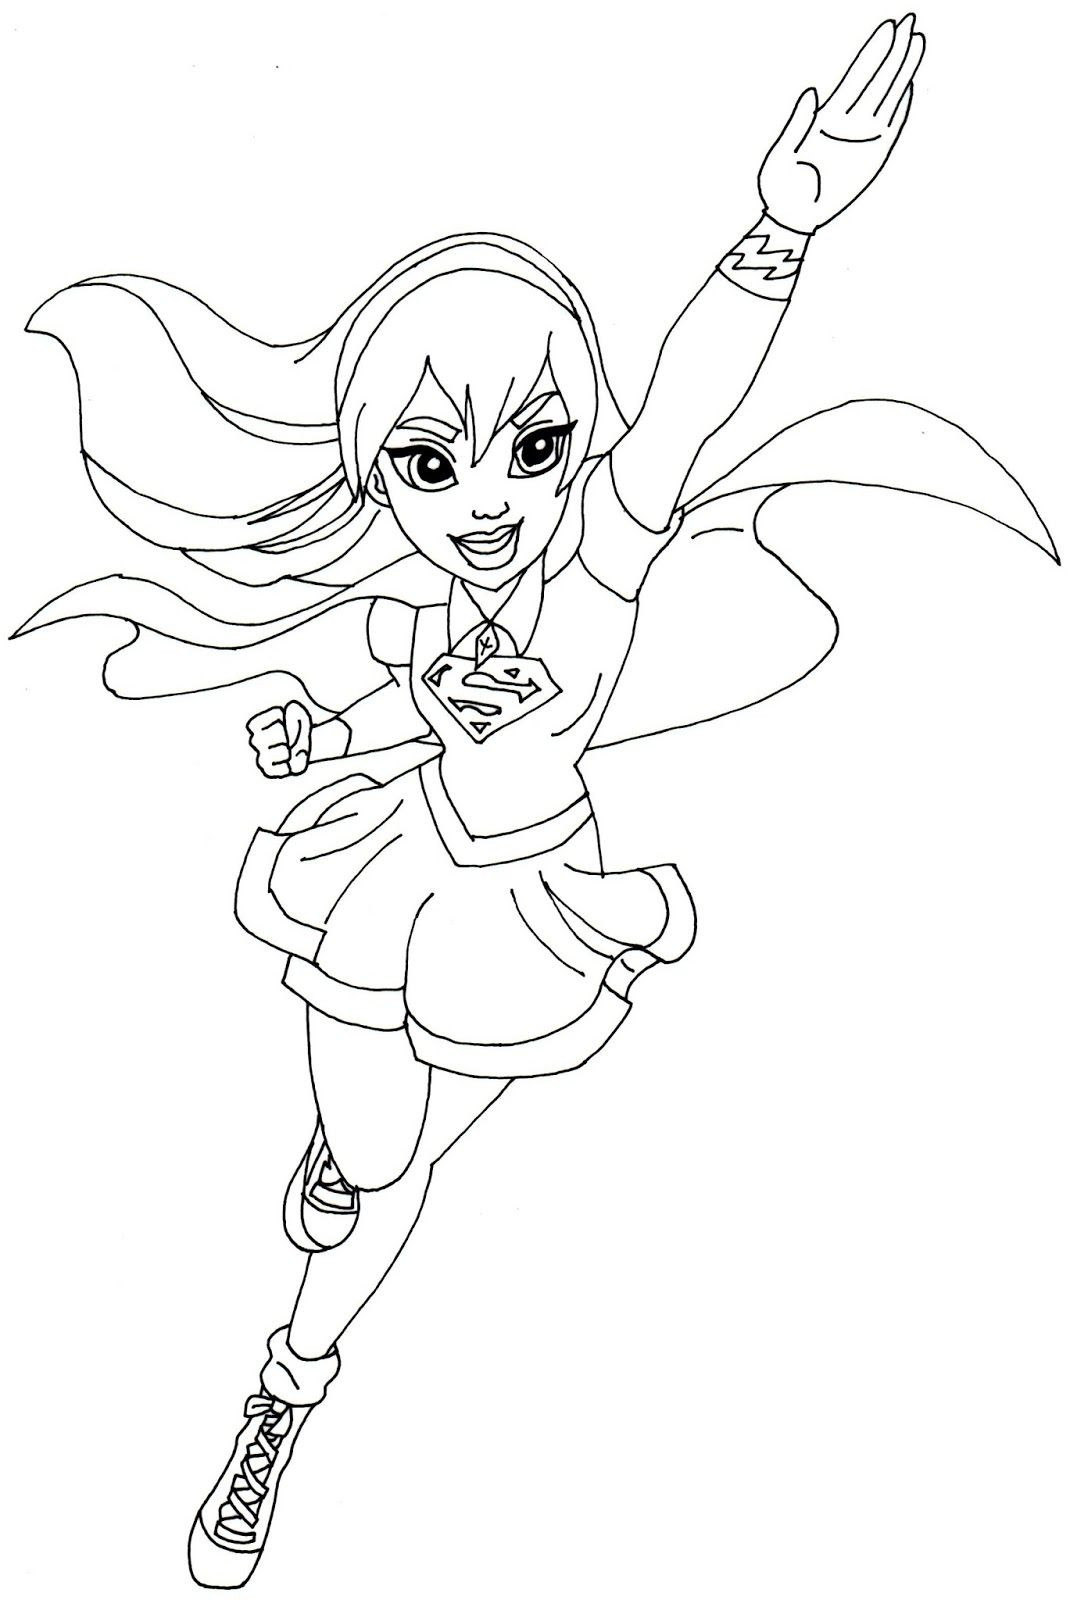 Coloring Pages Of Supergirl
 Free printable super hero high coloring page for Supergirl